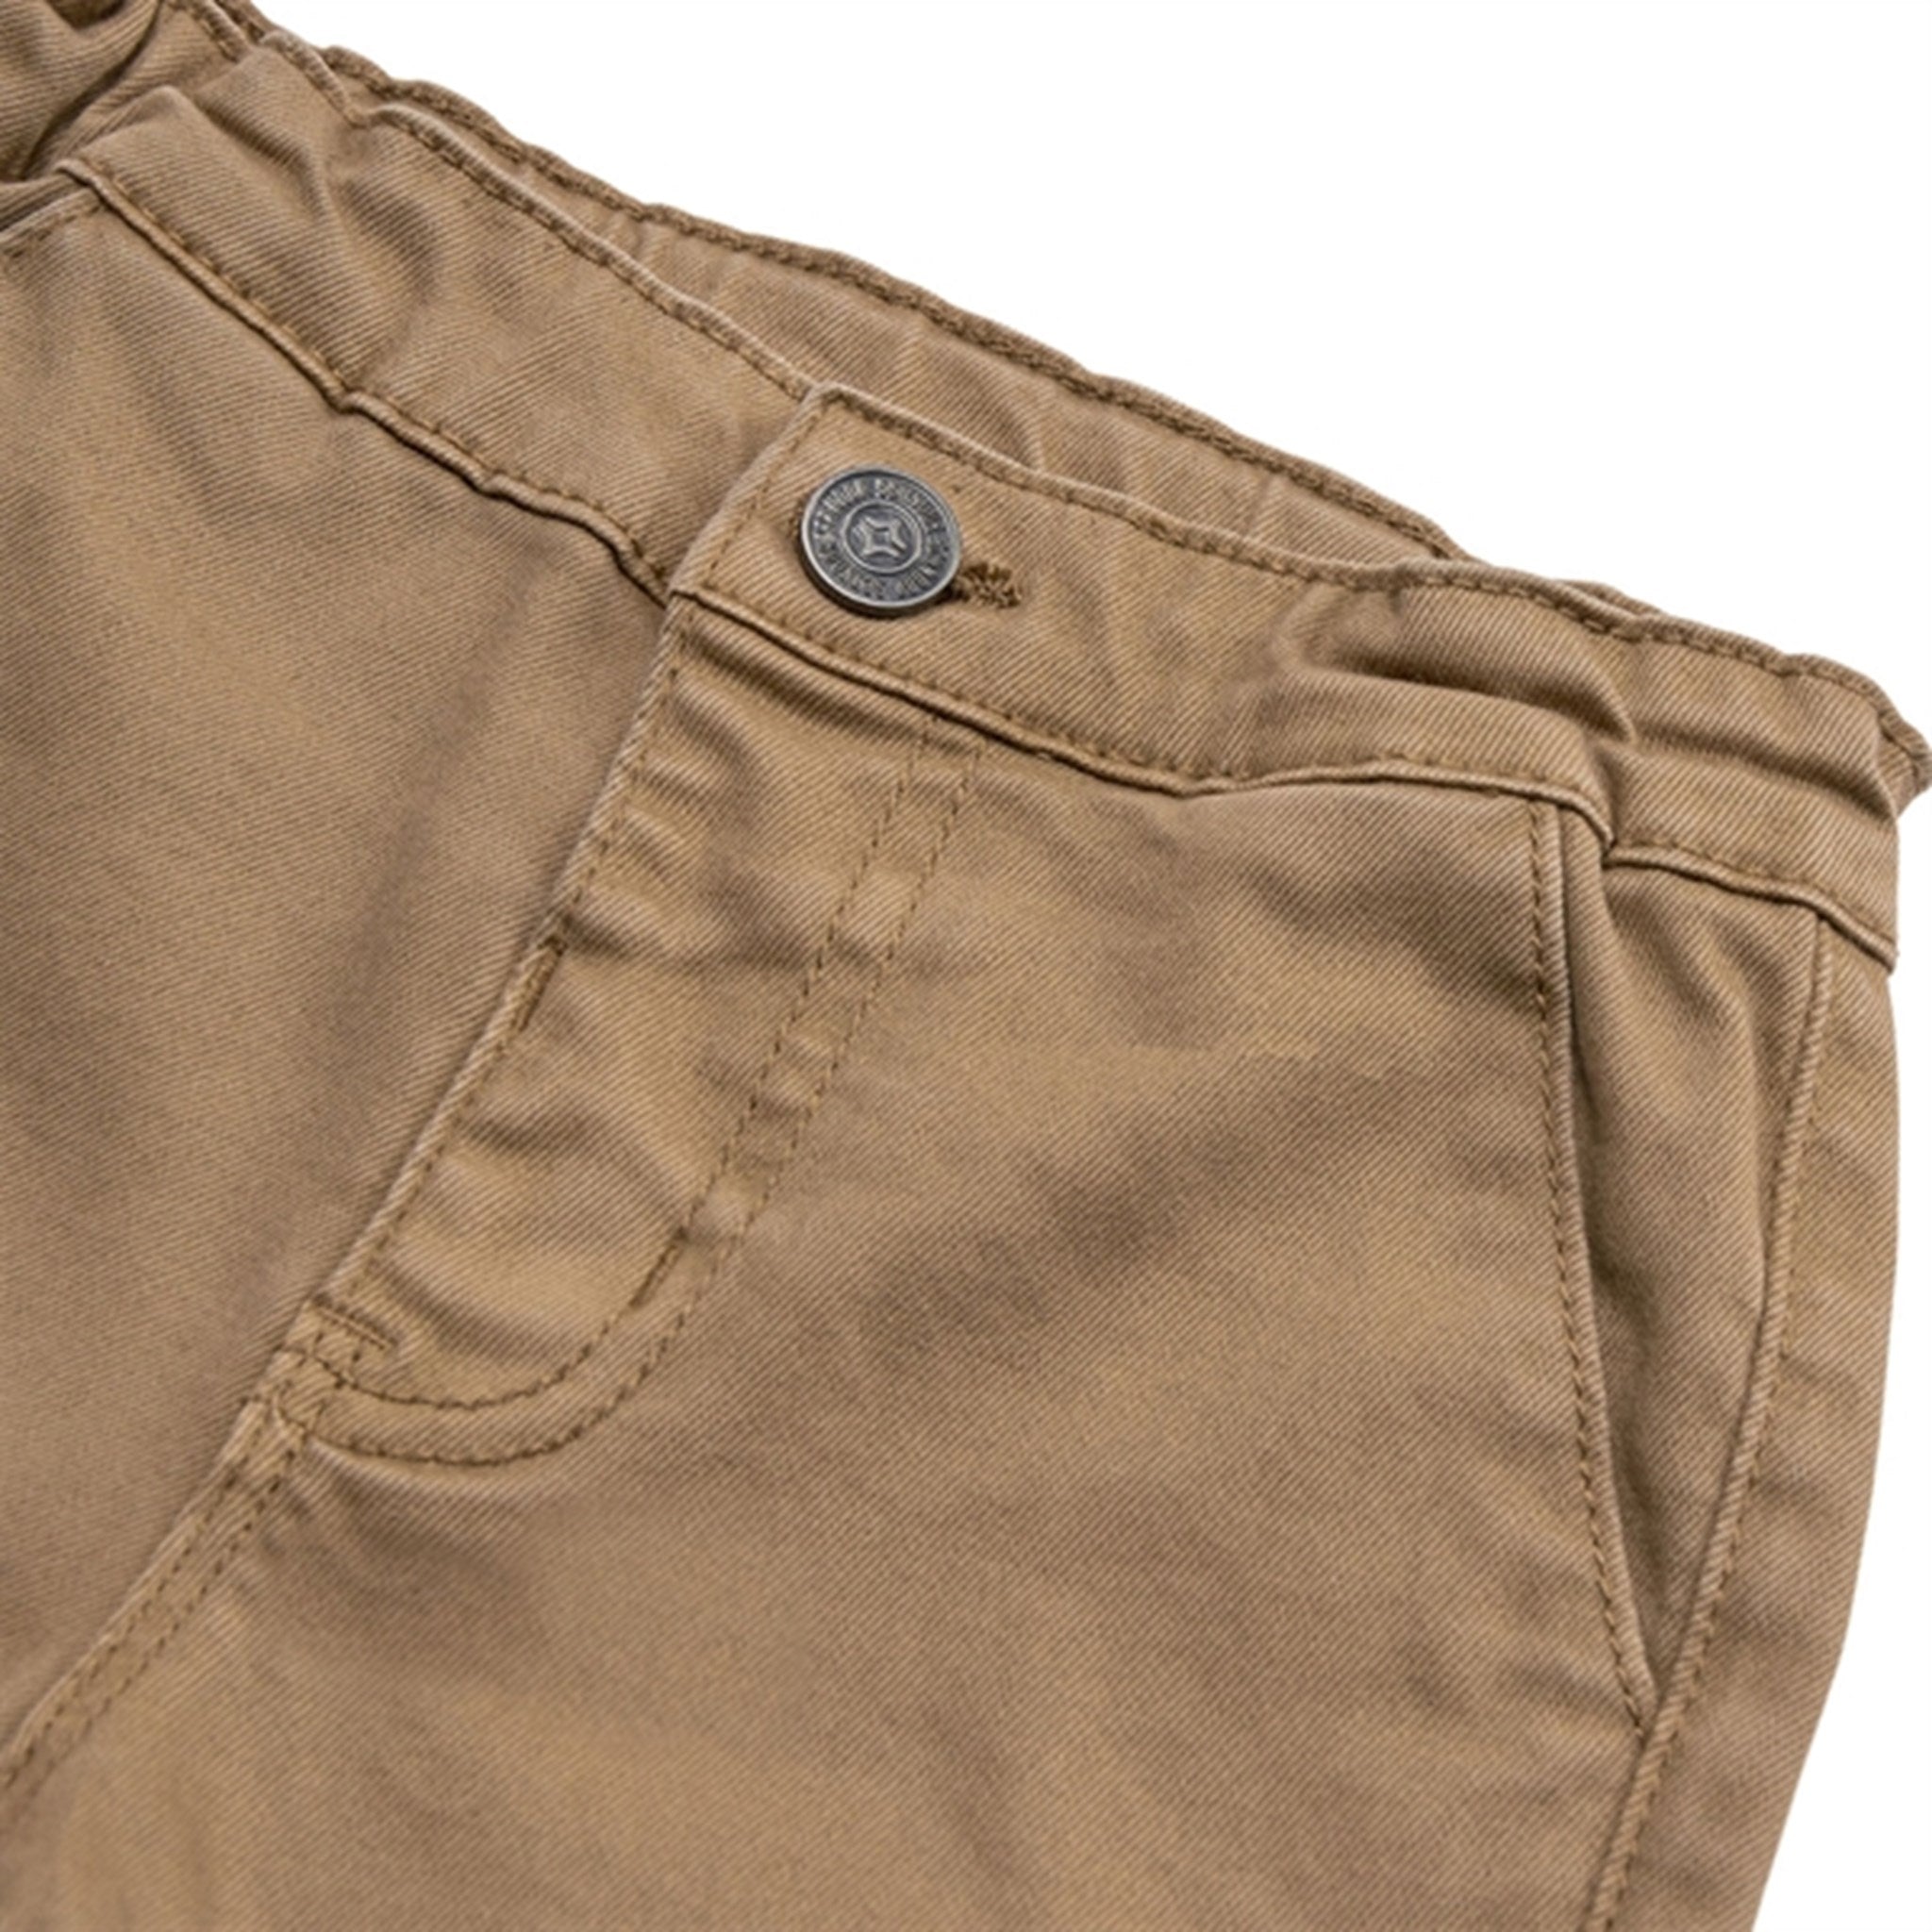 Petit by Sofie Schnoor Camel Shorts 8